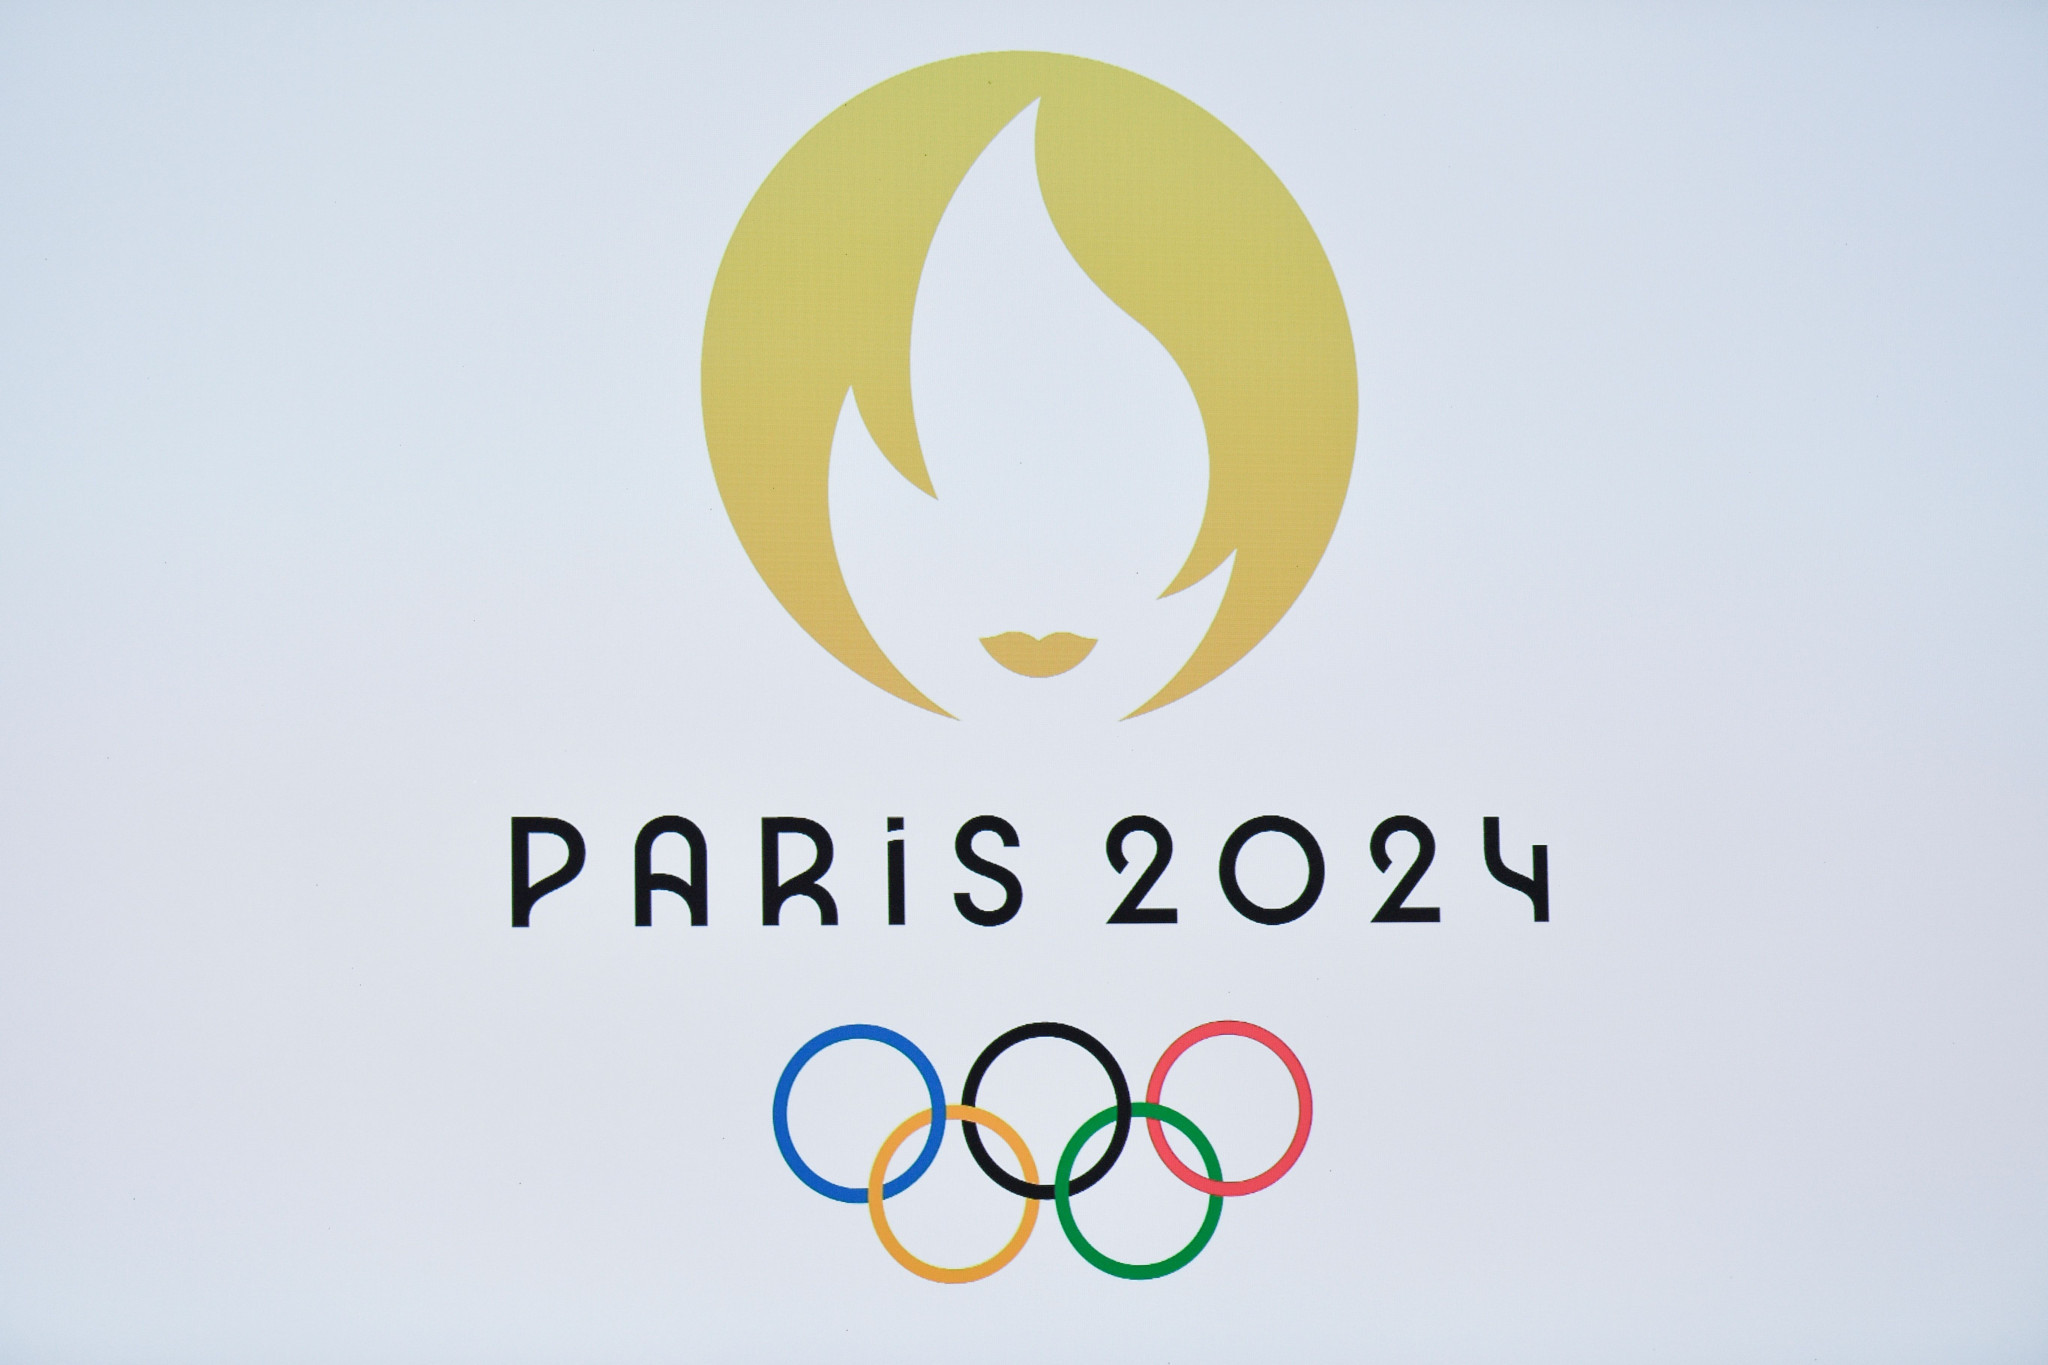 Paris 2024 publishing calls for interest in official licensing programme